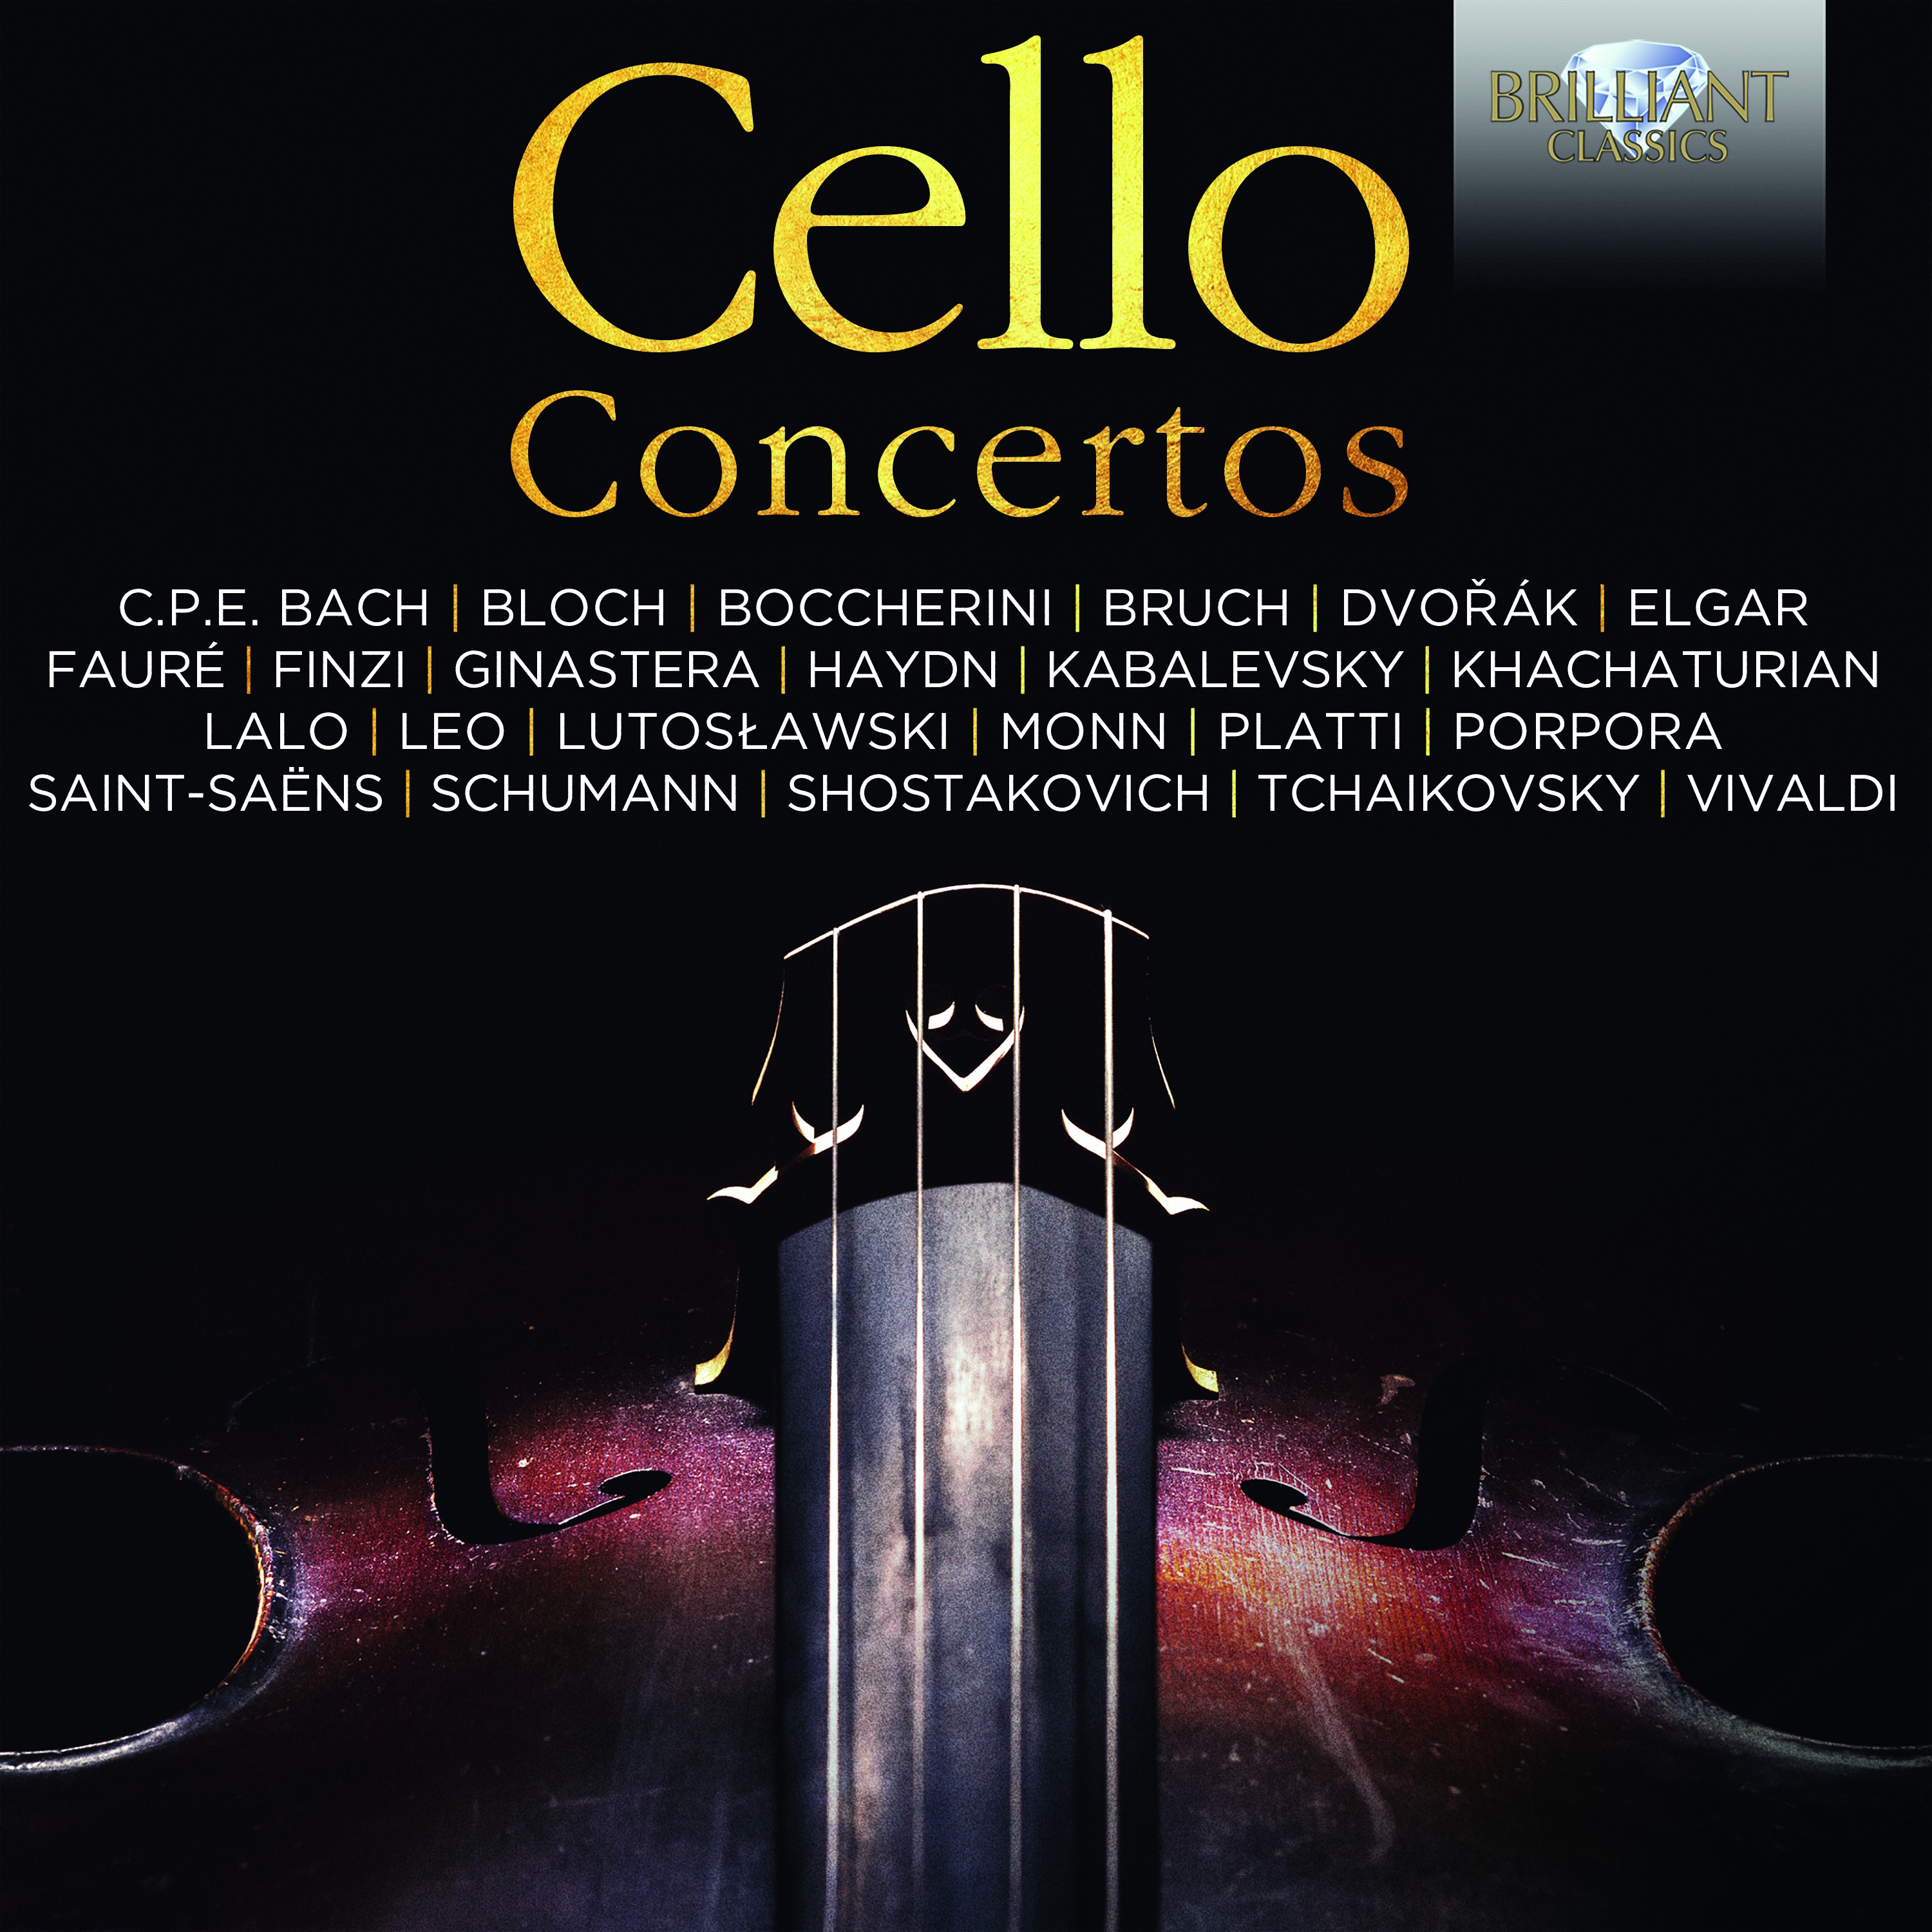 Concerto for Cello, 2 Horns and Strings No. 9 in B-Flat Major, G. 482: II. Andantino grazioso